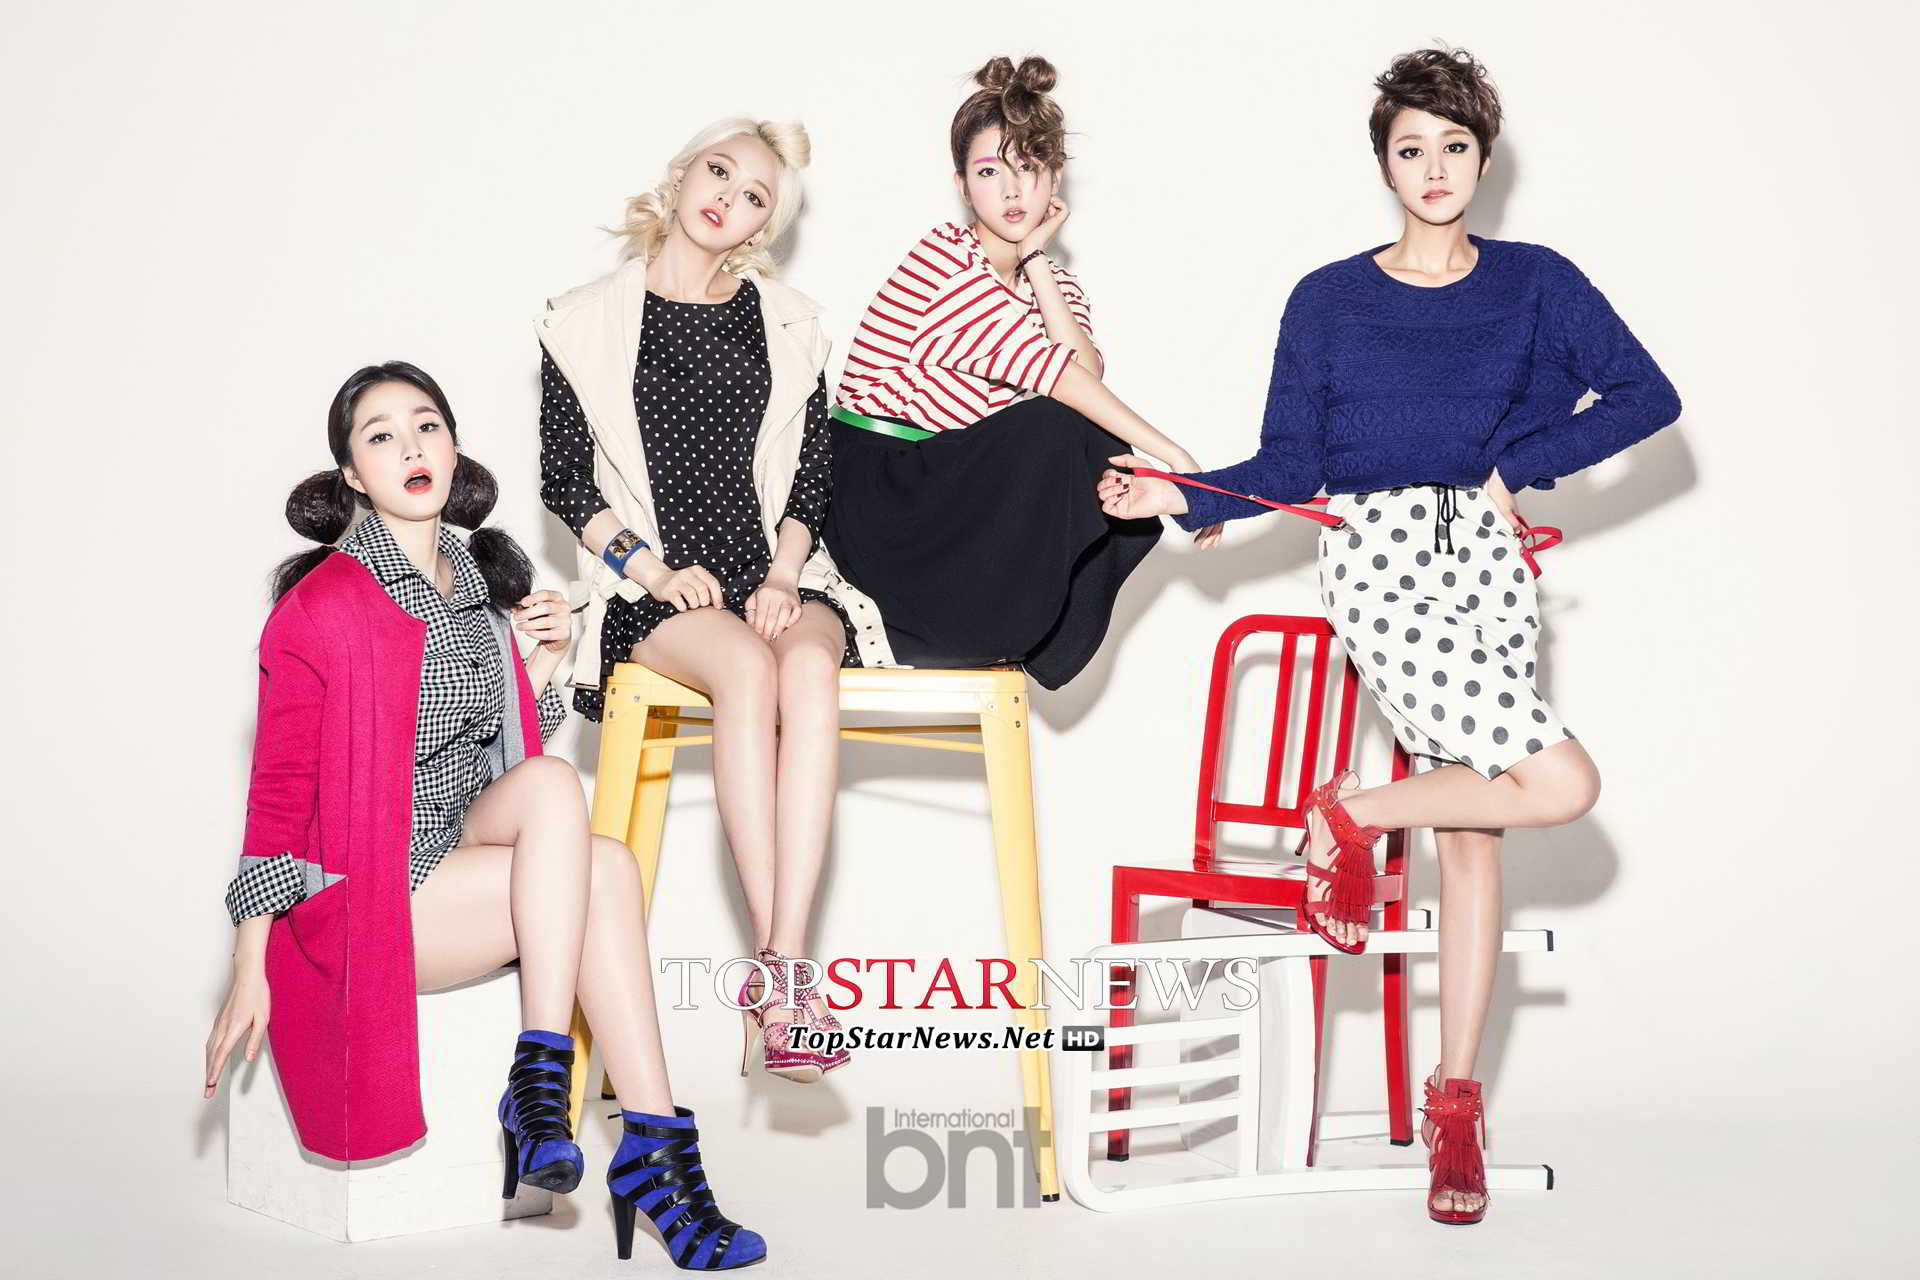 Spica - bnt (7)